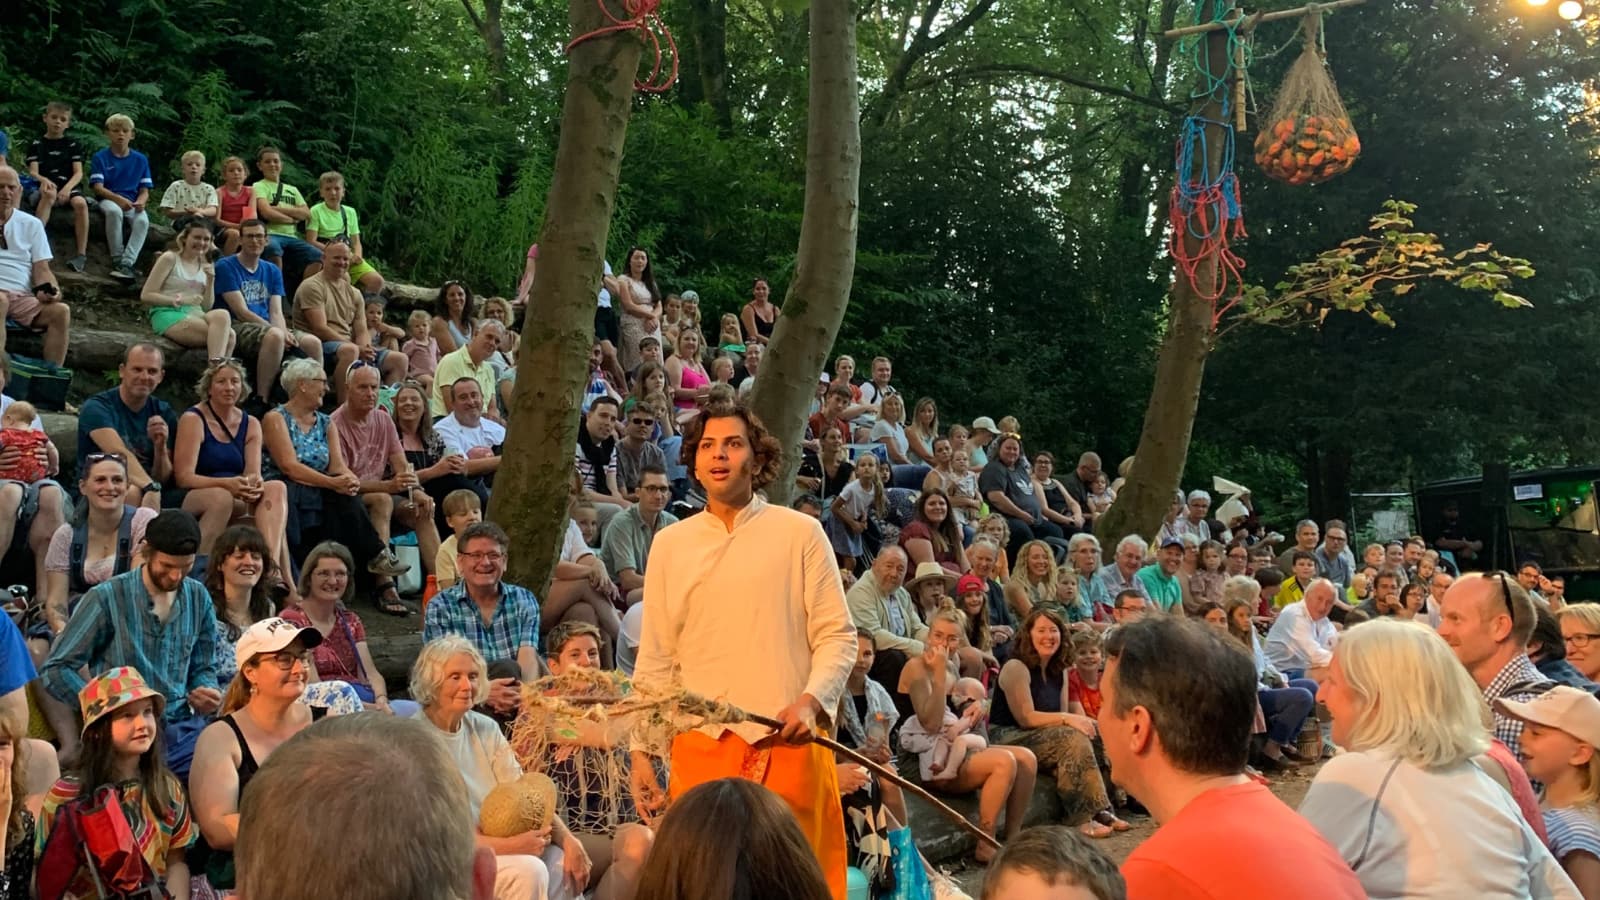 An actor playing Mowgli stands in a wooded glade surrounded by the audience